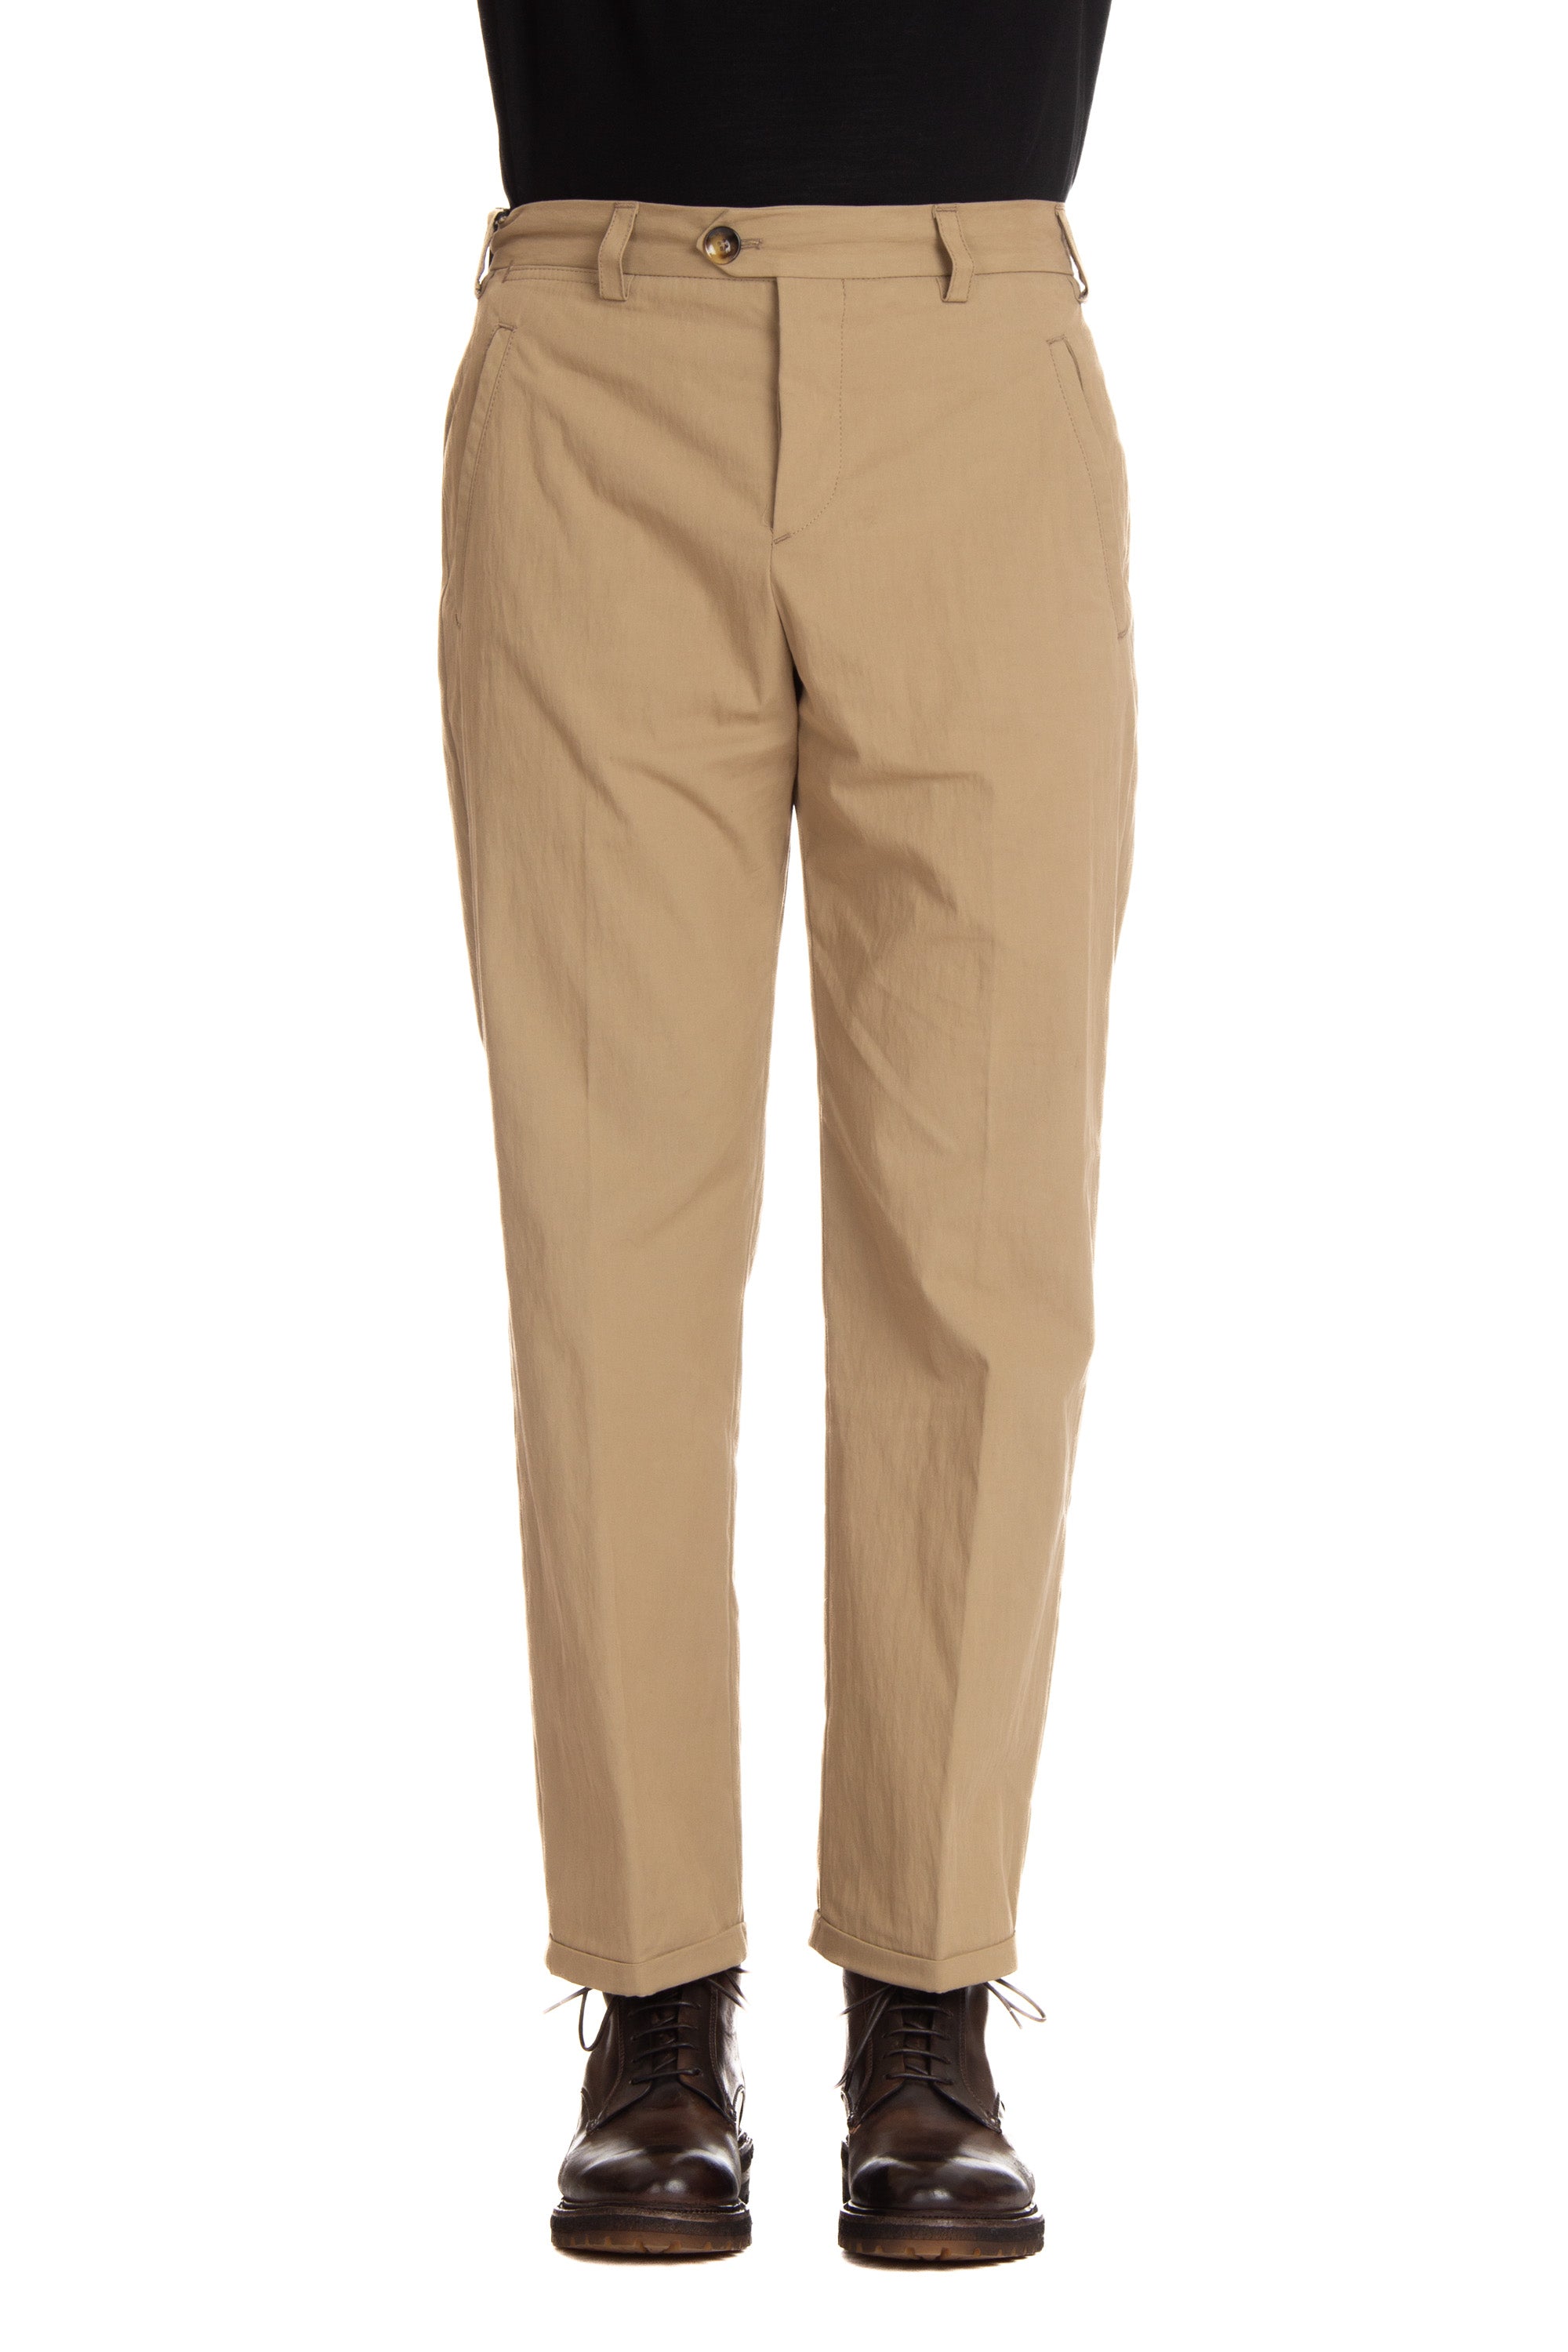 Winter poplin trousers from The Writer line